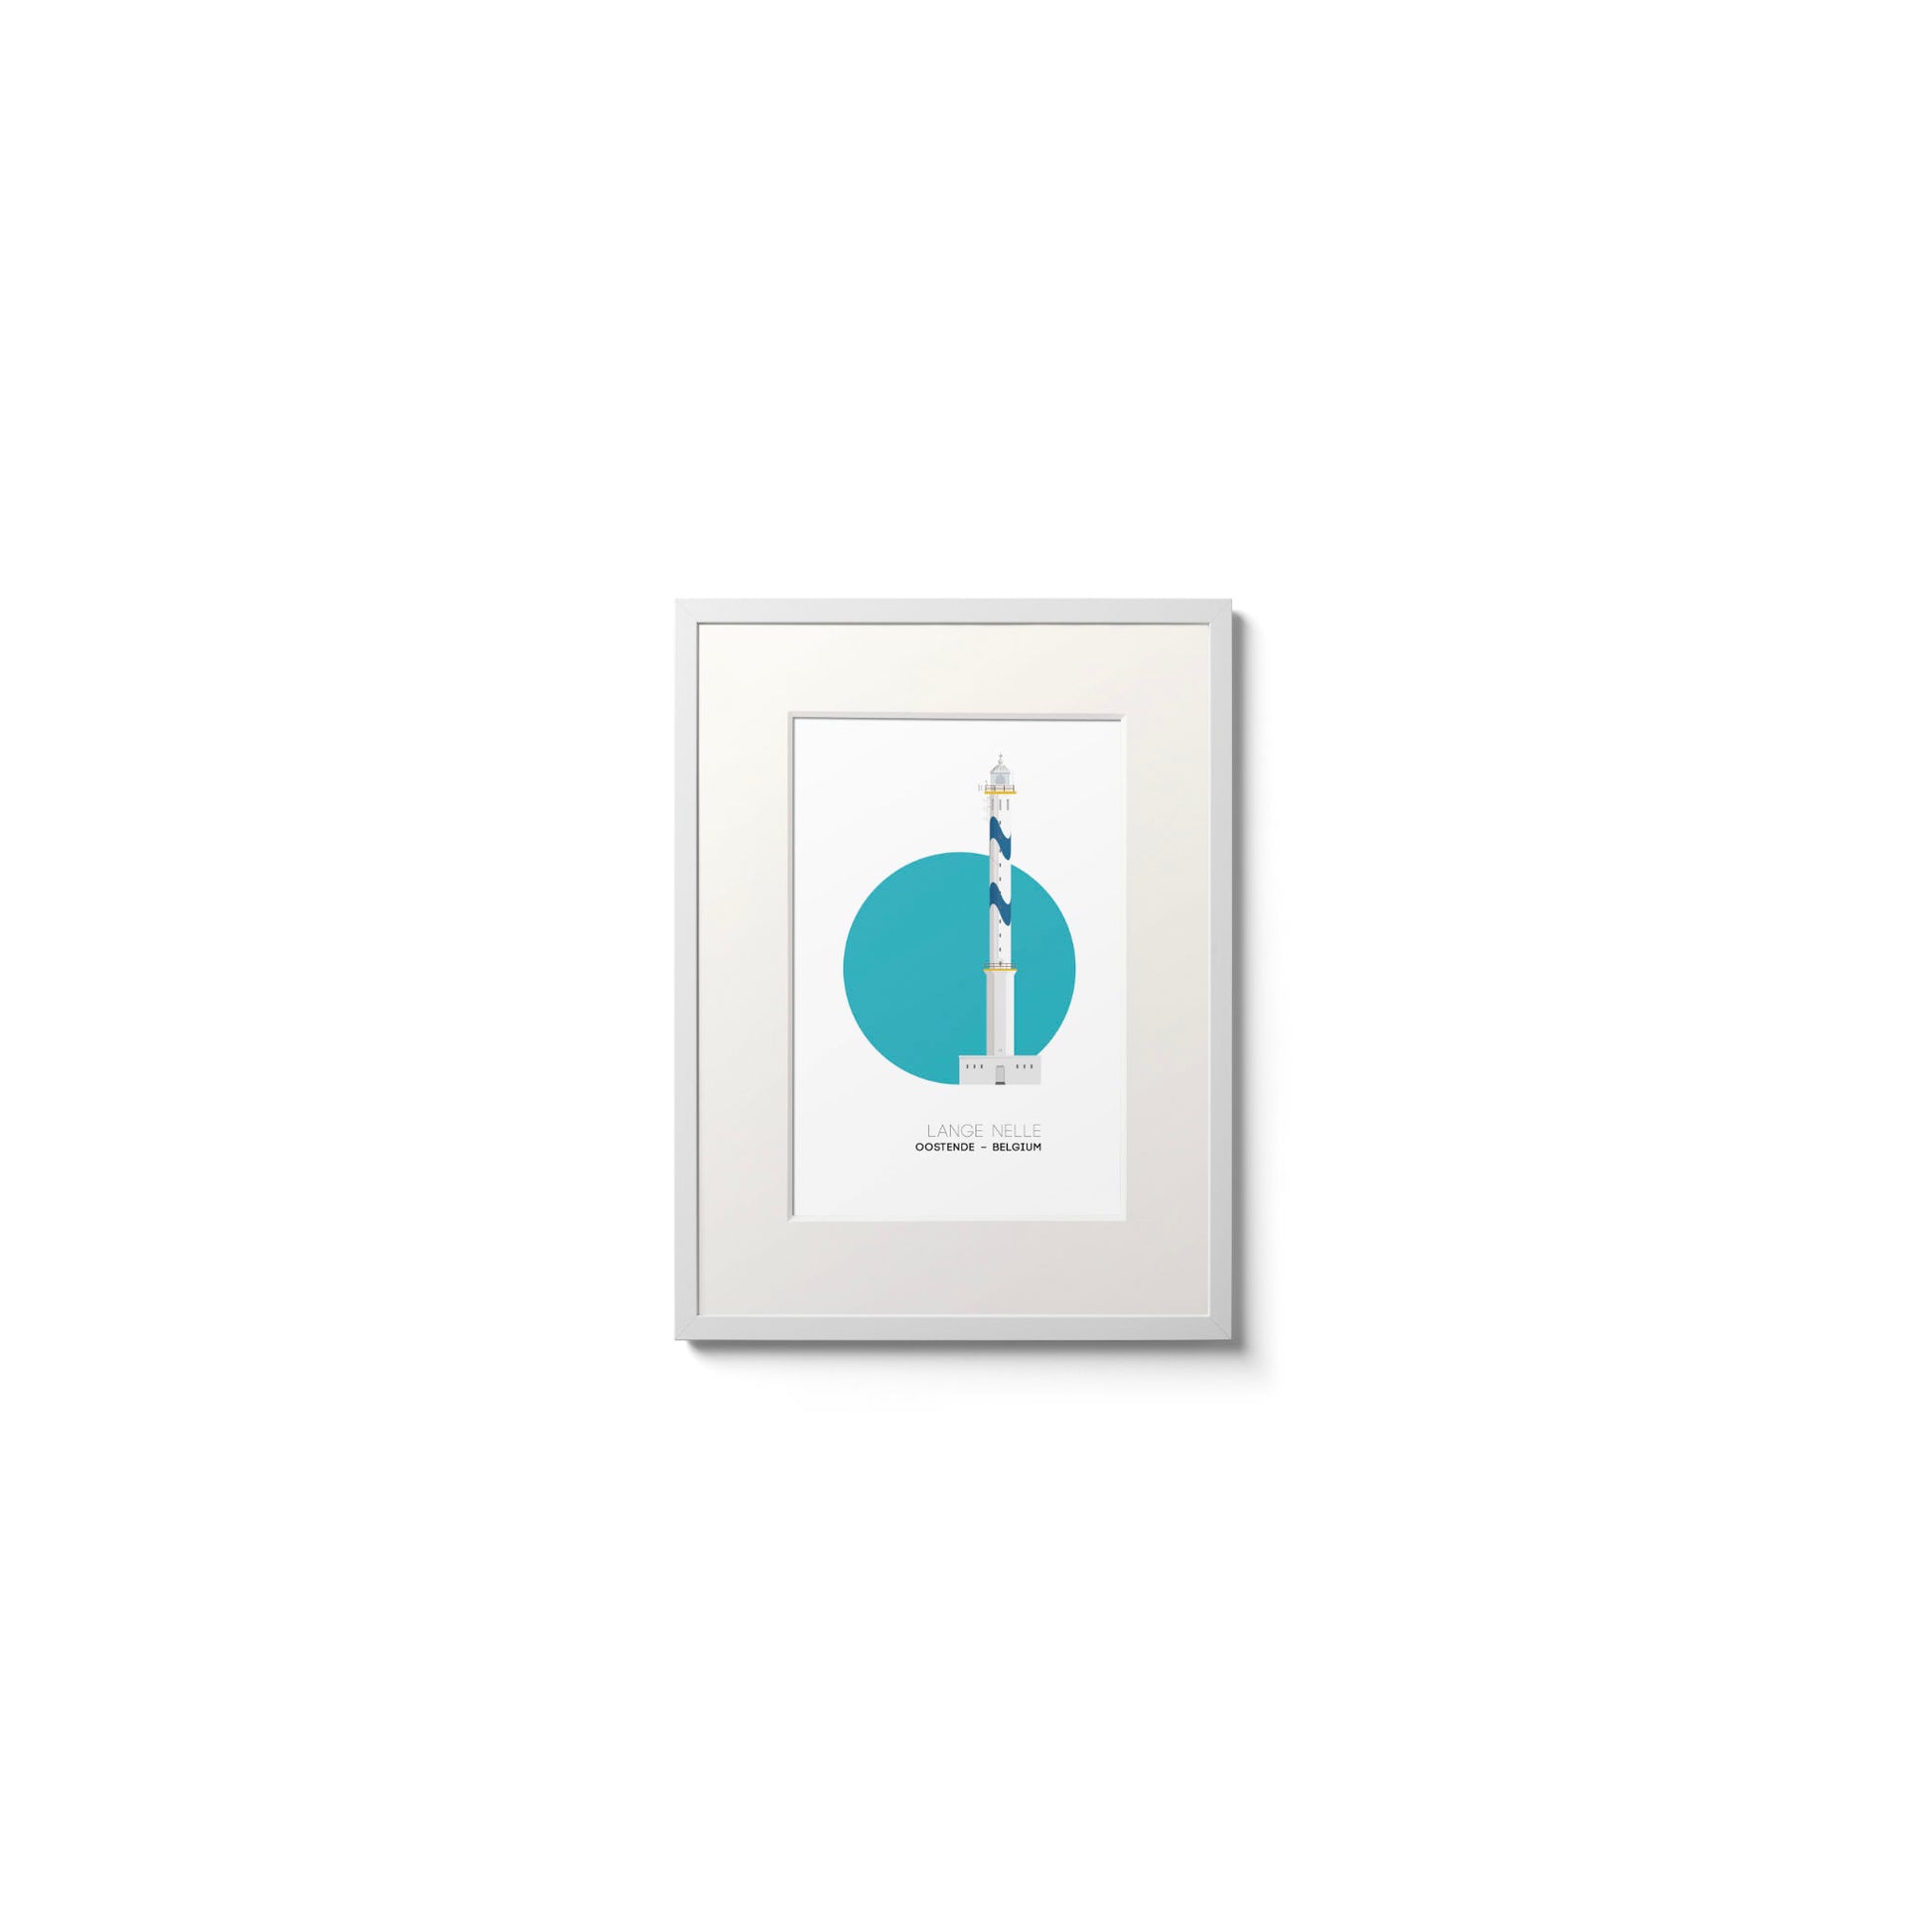 Illustration of the Lange Nelle lighthouse in Oostend, Belgium, with blue waves pattern painted onto it. On a white background with aqua blue circle as a backdrop, framed and measuring 15x20cm.